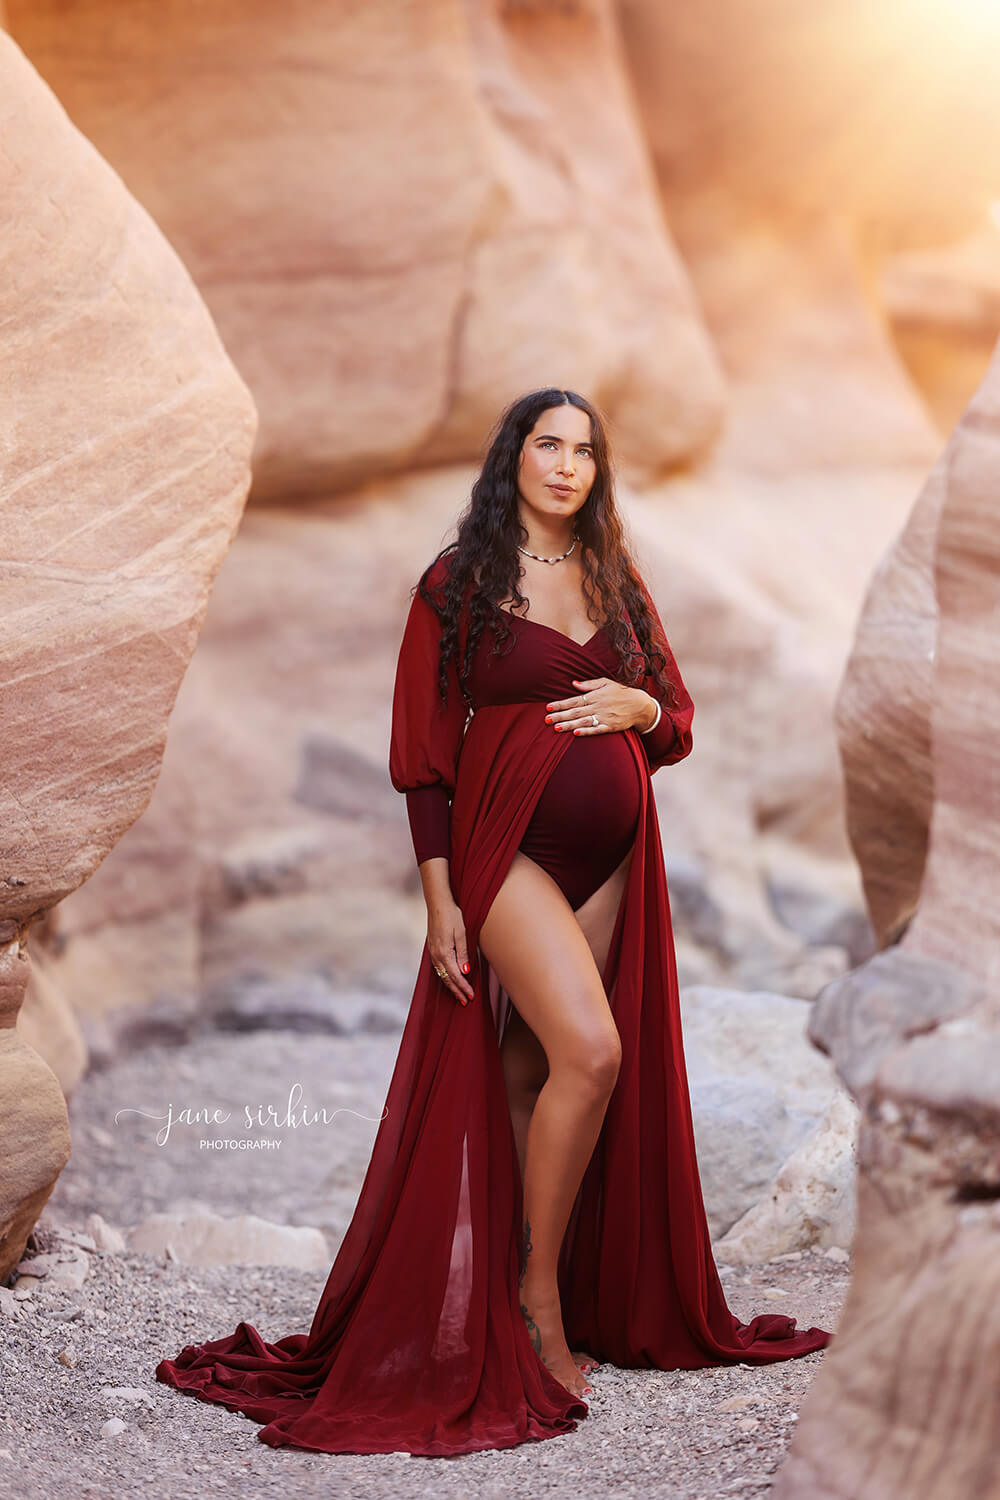 pregnant model with long curled hair poses outside wearing a maternity outfit made of jersey and chiffon. The dress color is bordeaux and it features an adjustable sweetheart neckline and long chiffon bishop sleeves with jersey manchettes. the chiffon skirt has a split on the middle and a jersey bodysuit can be seen underneath.